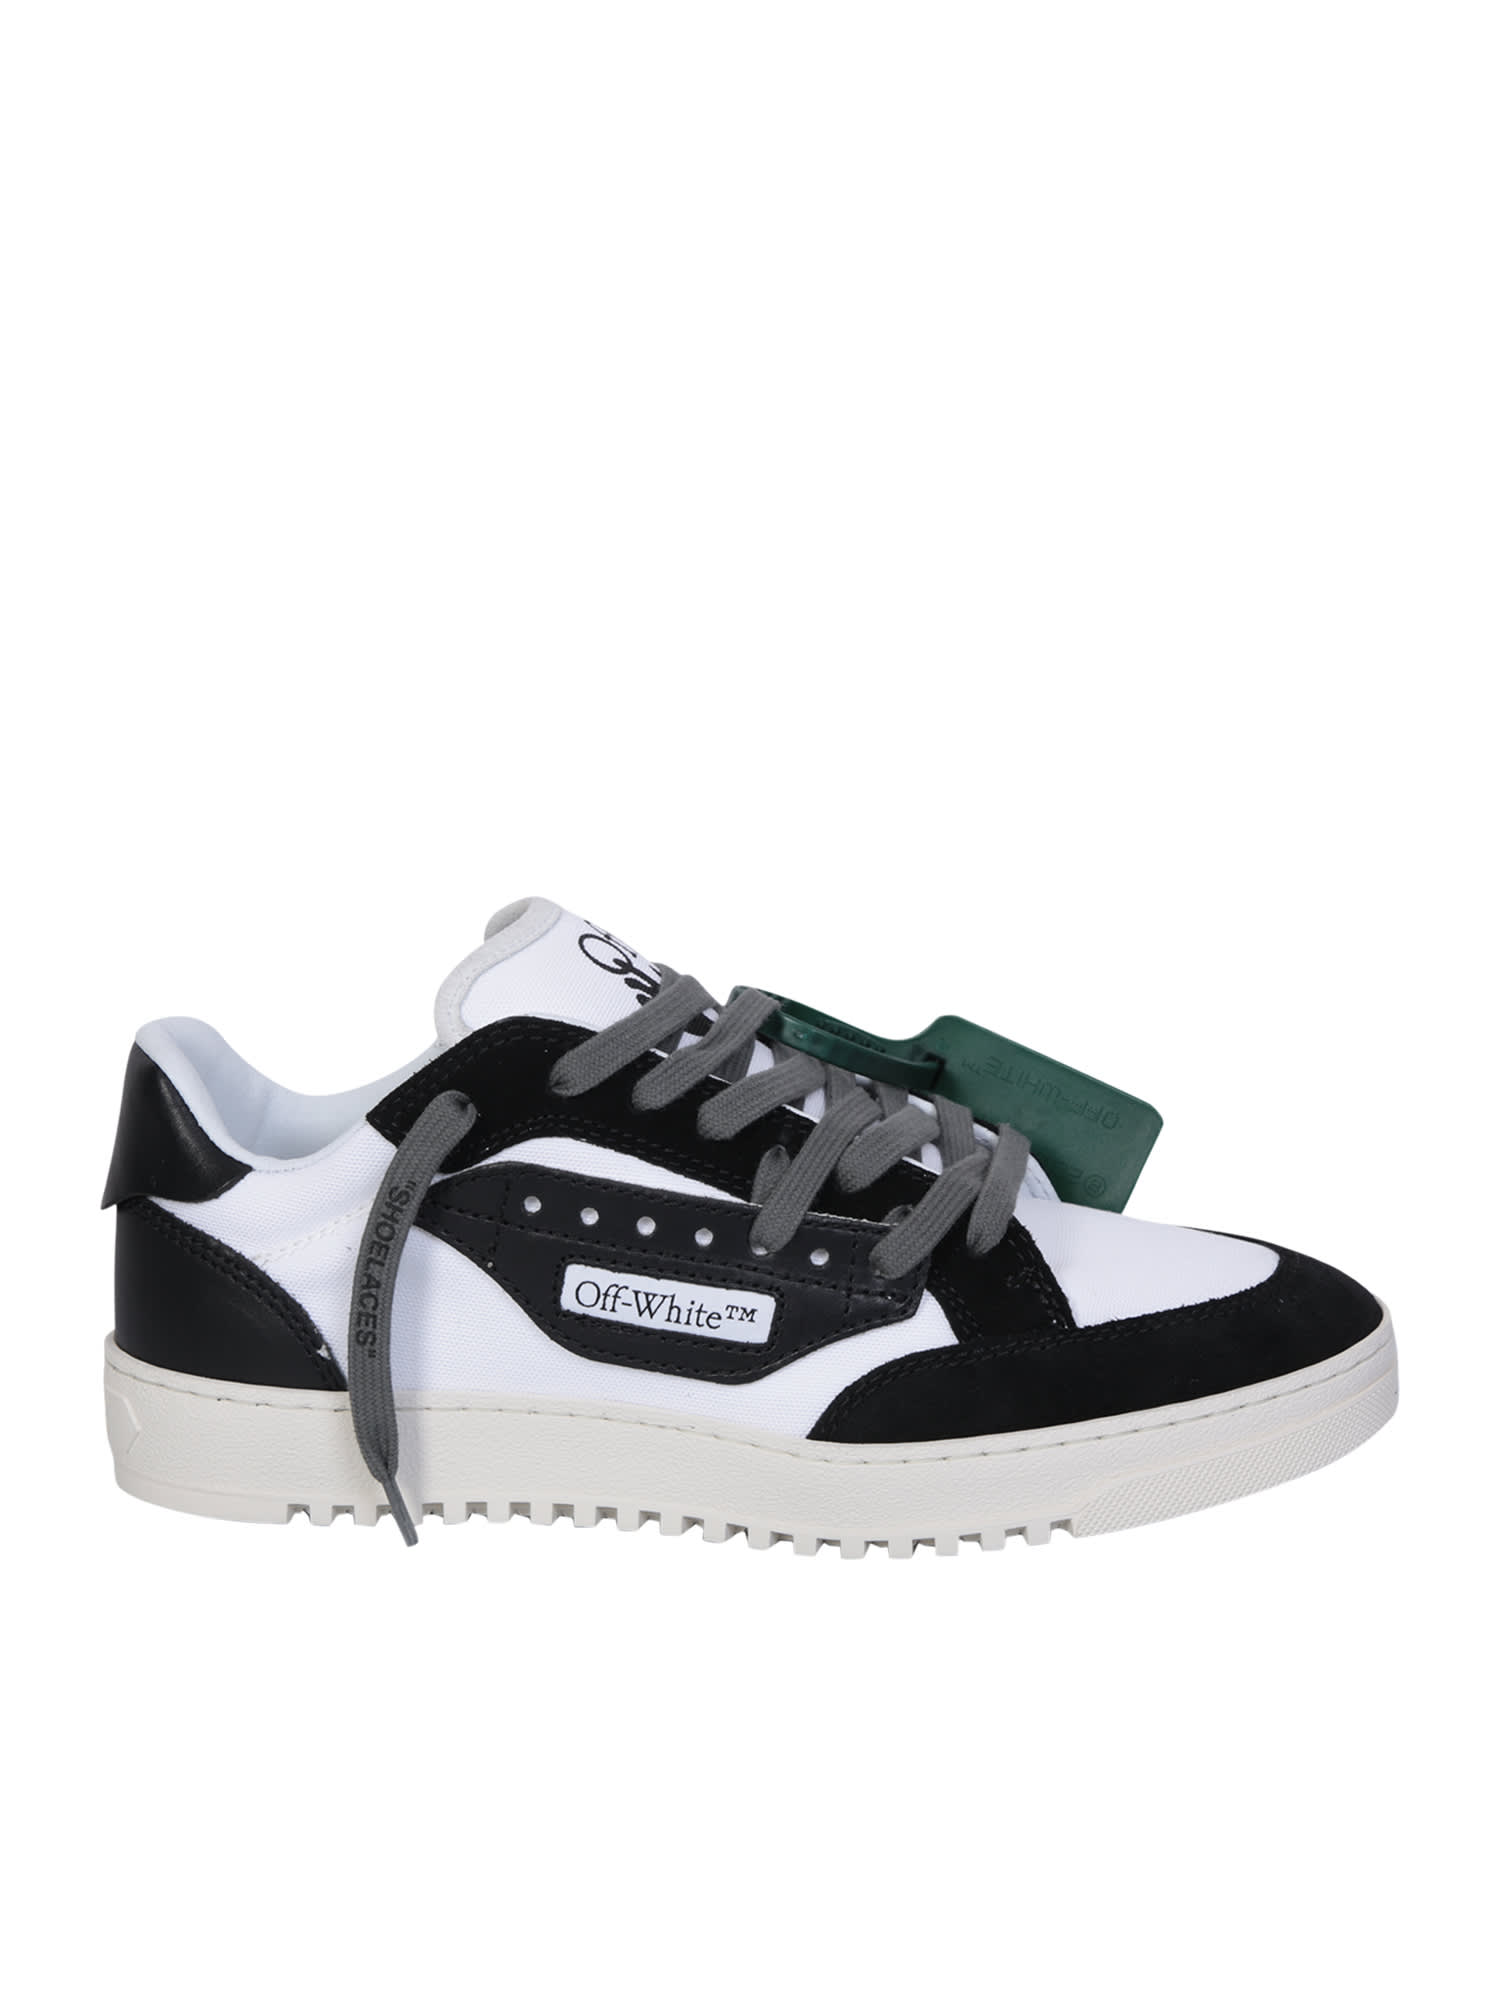 OFF-WHITE 5.0 LEATHER SNEAKERS